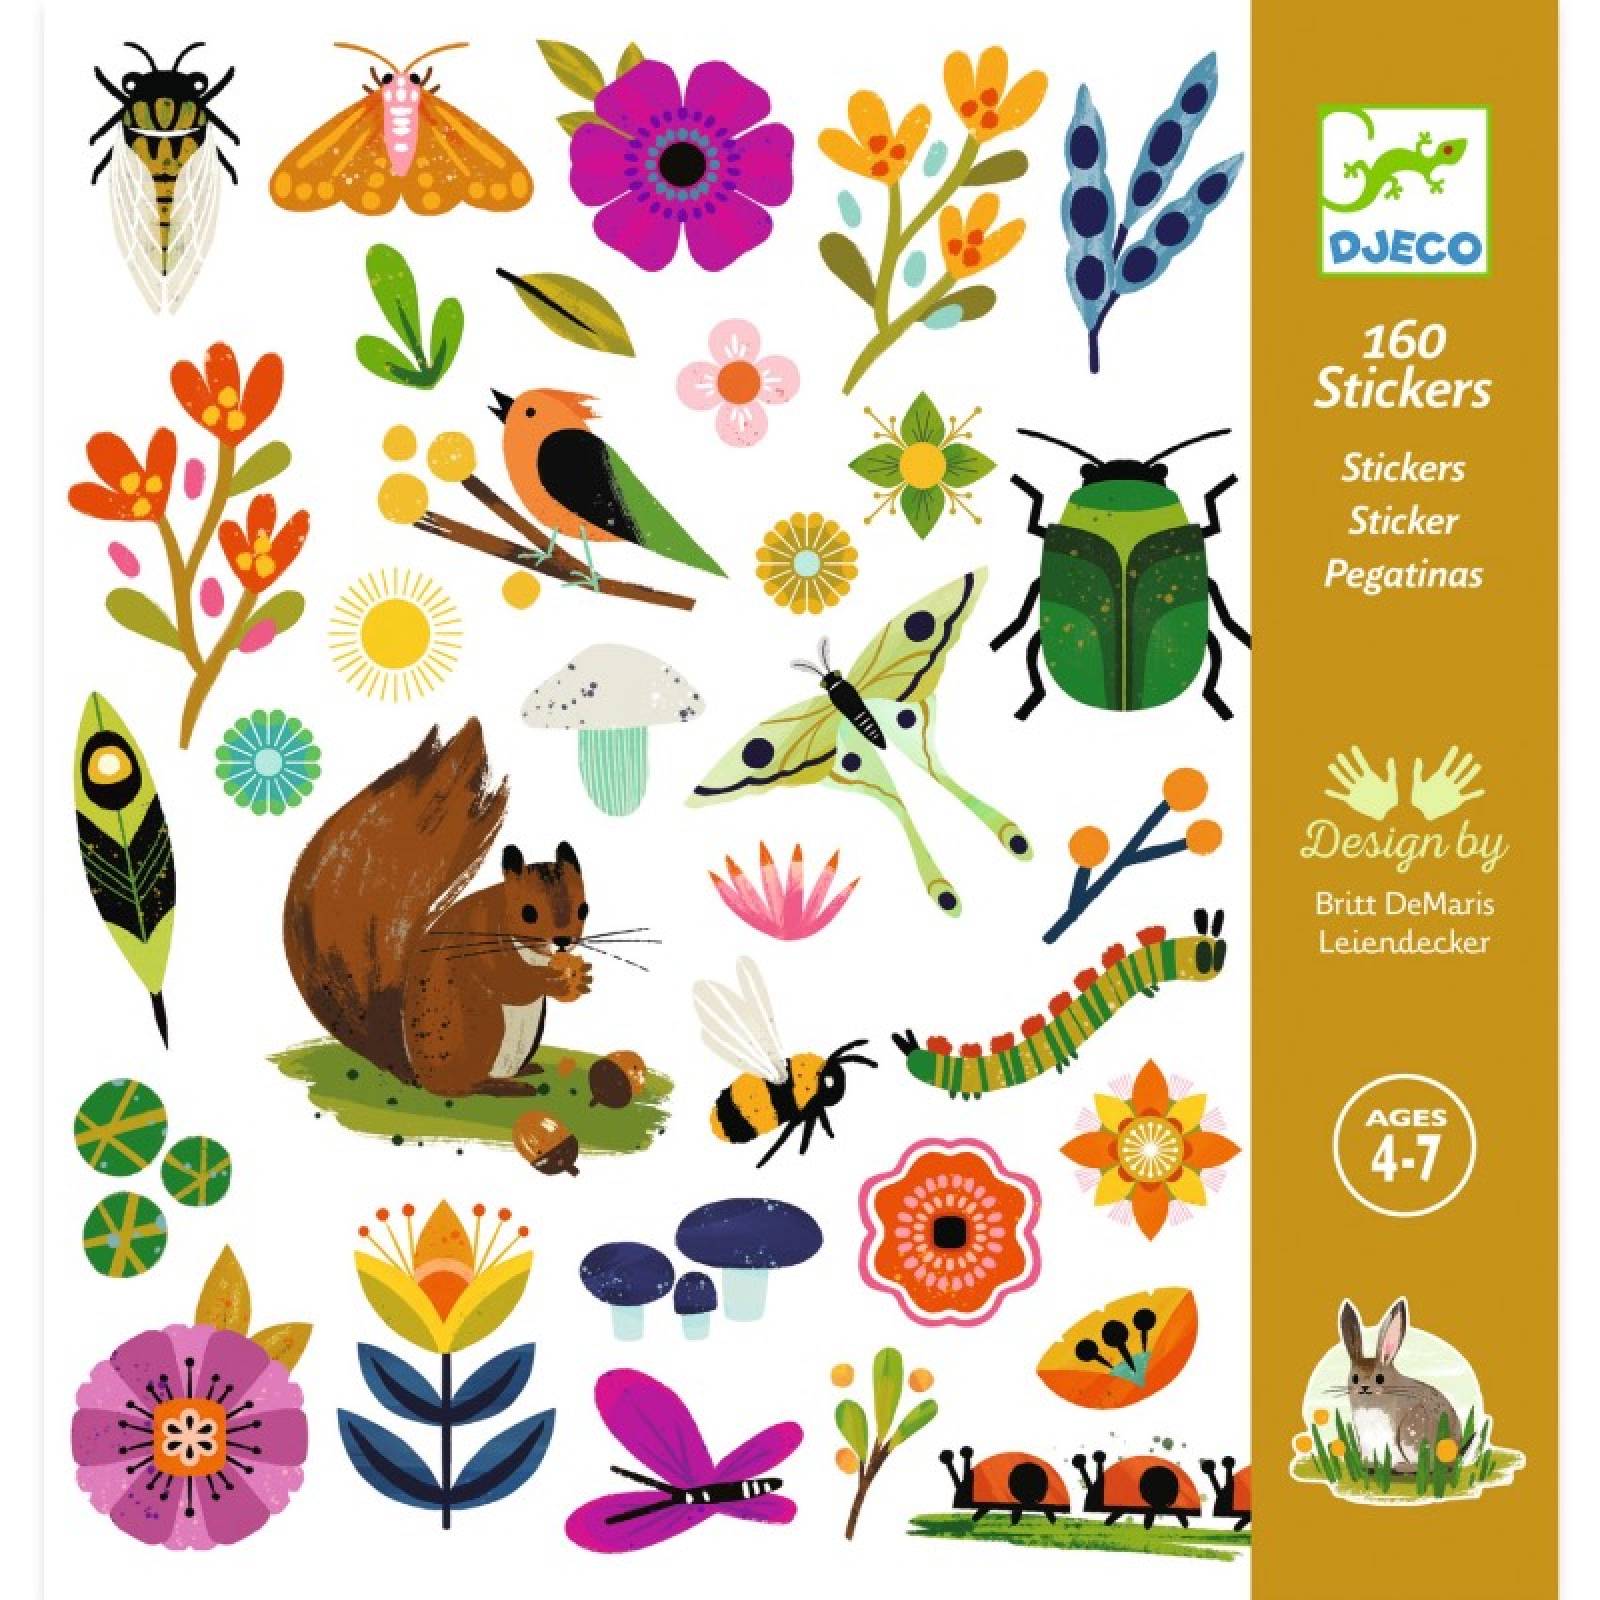 Garden - Pack Of 160 Stickers By Djeco 4+